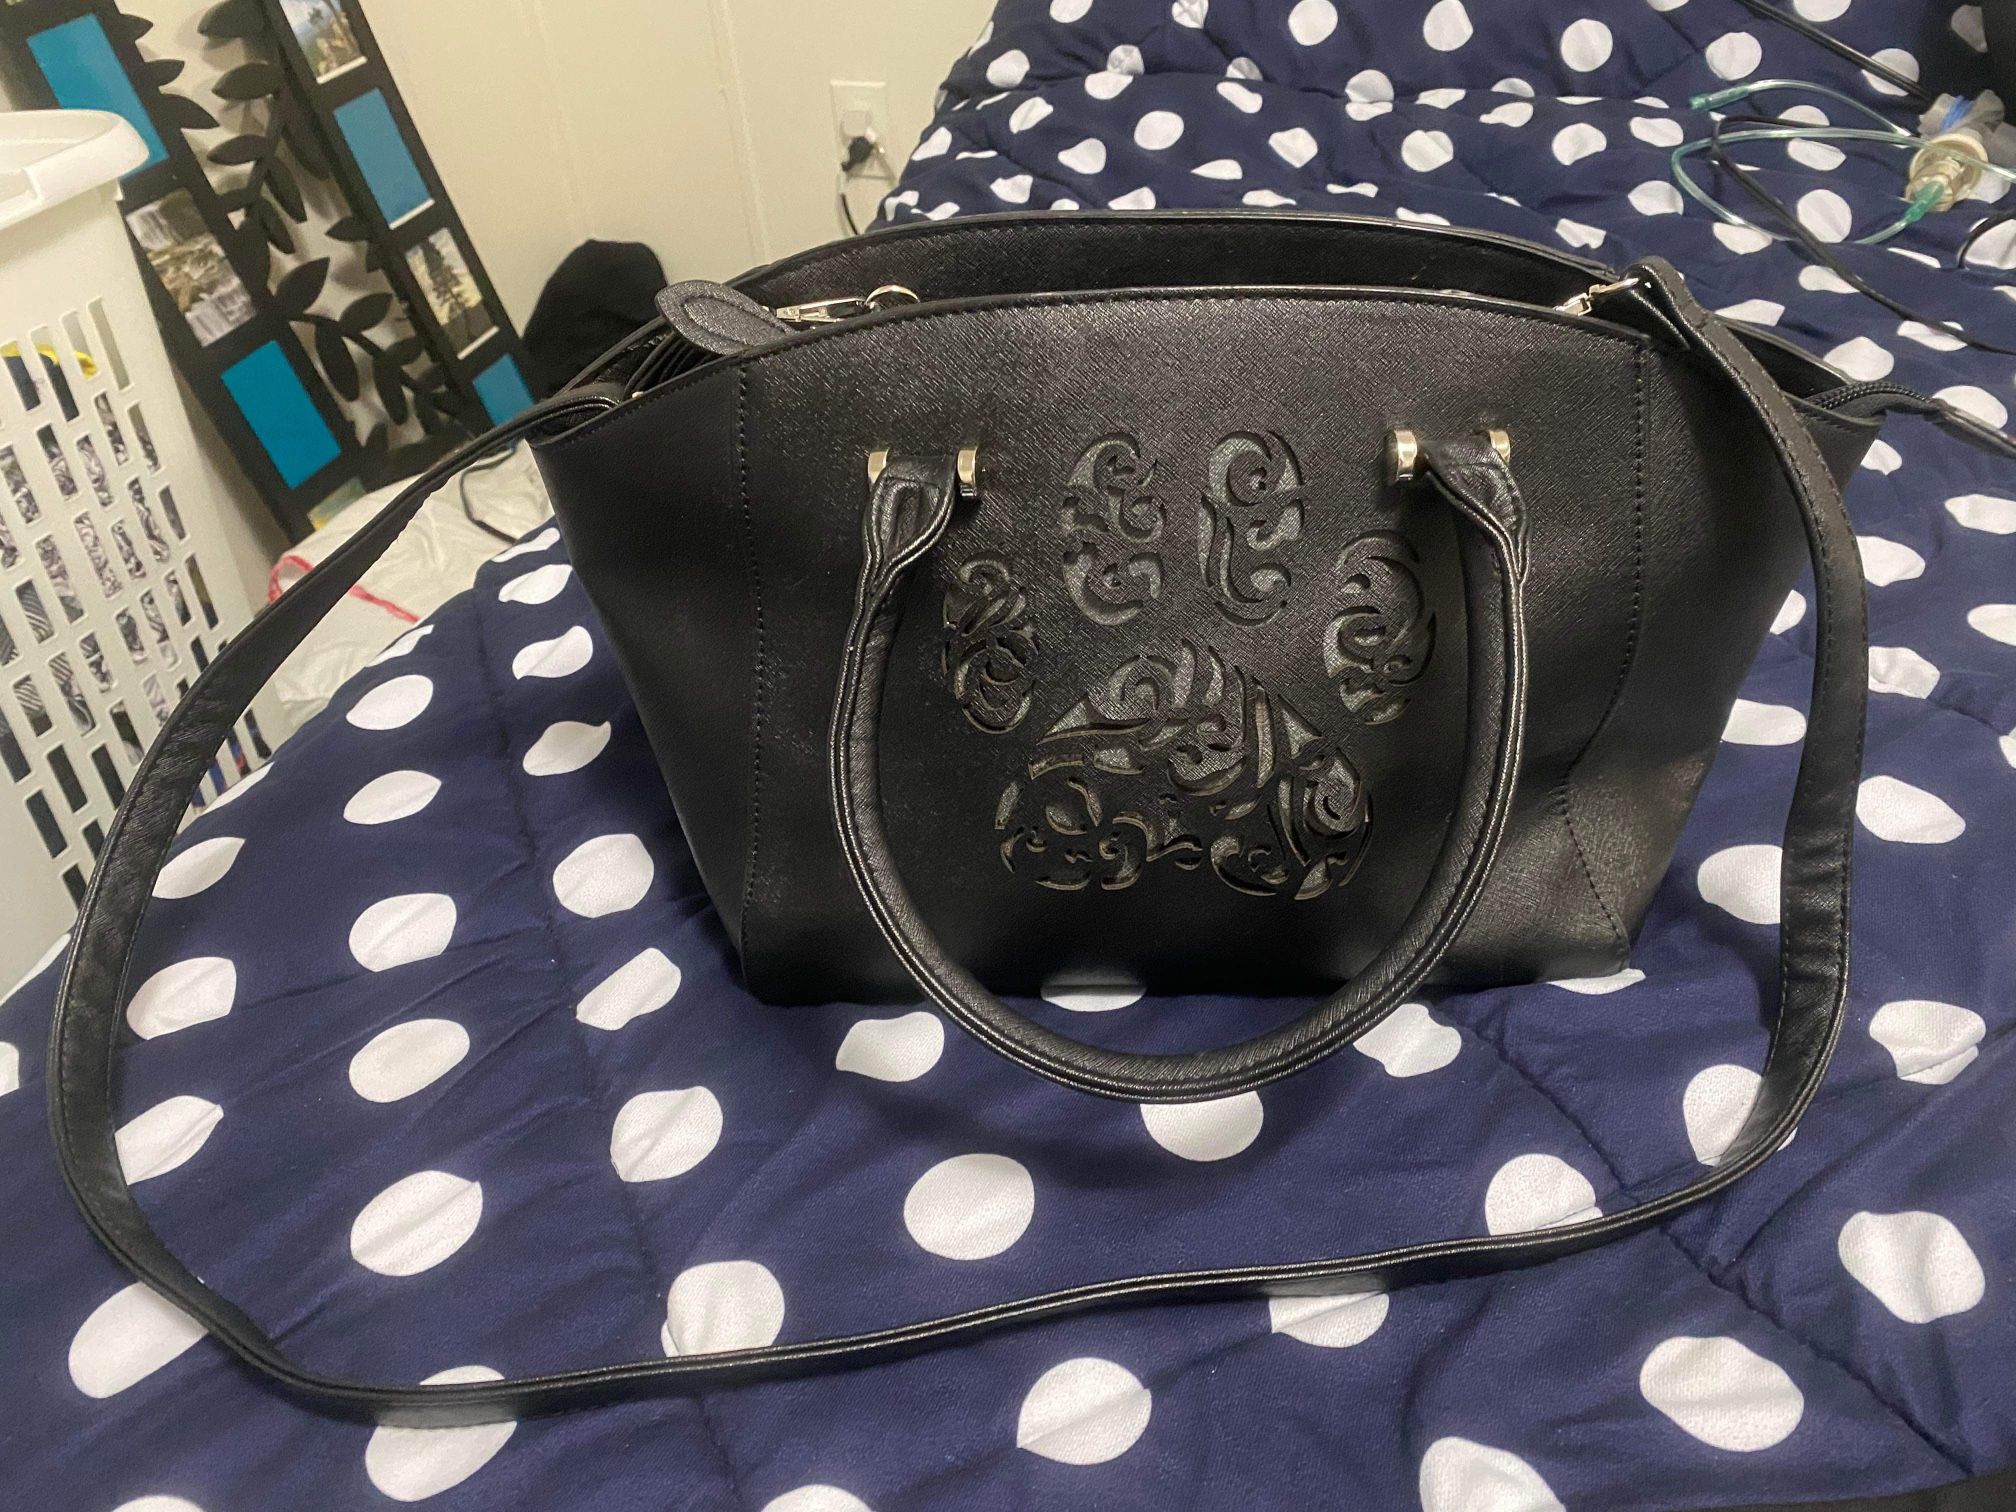 Cute medium purse- black- used 1 time for a family get together but no longer need it as I have may too many purses at the moment. Still looks basical